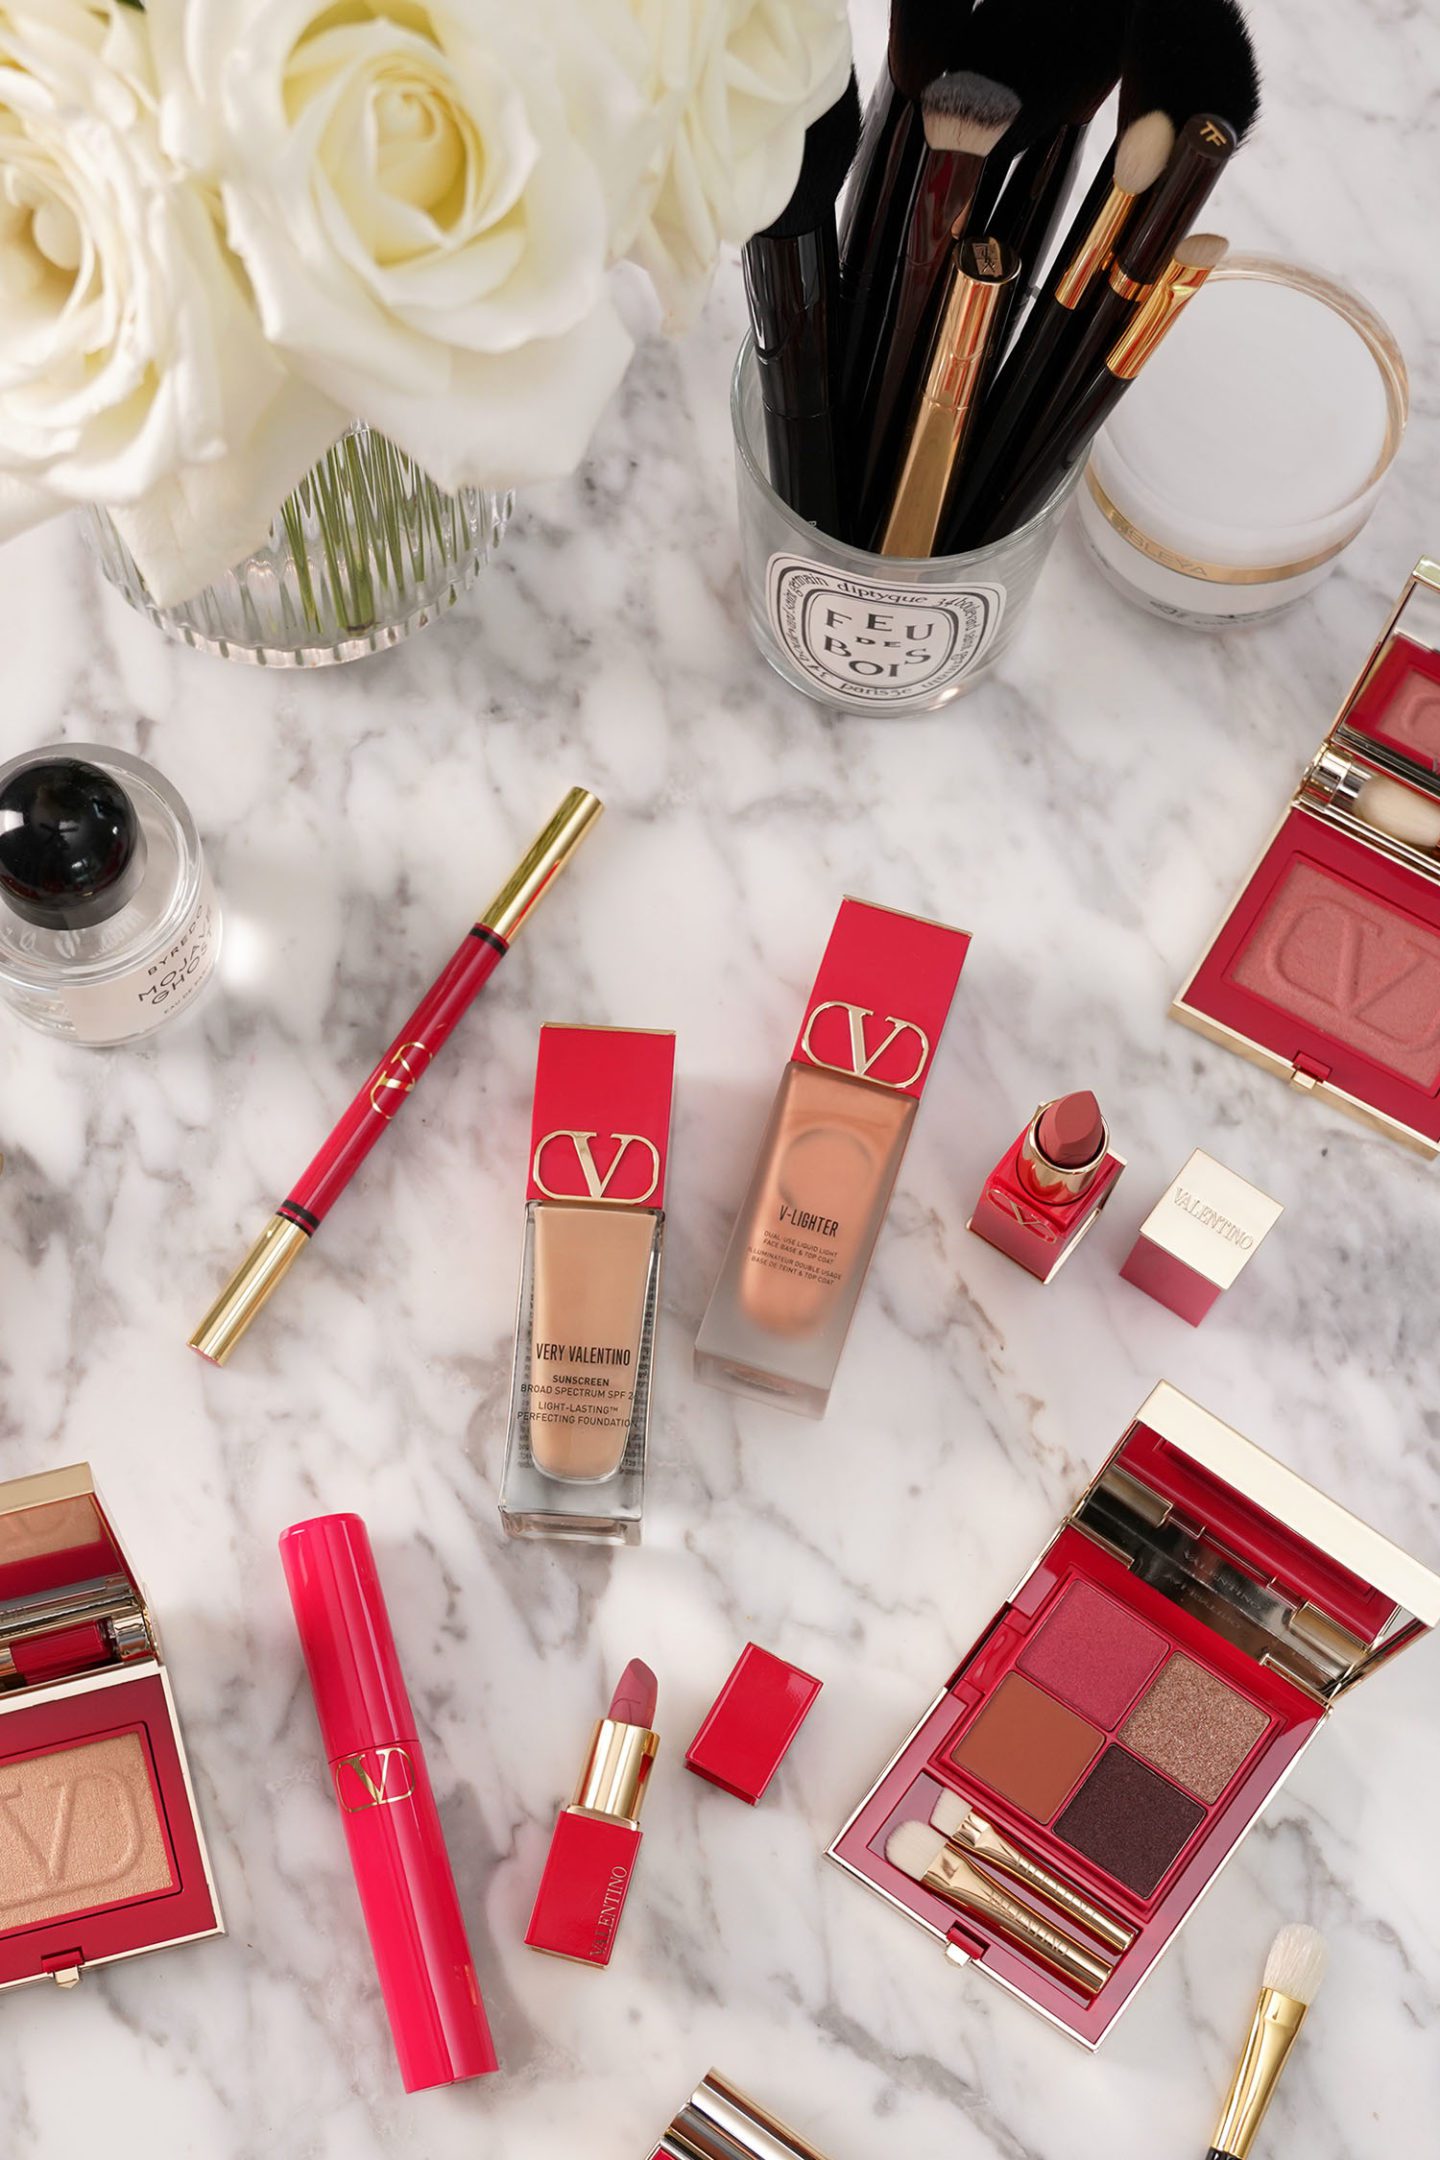 Valentino Beauty Launch from Nordstrom